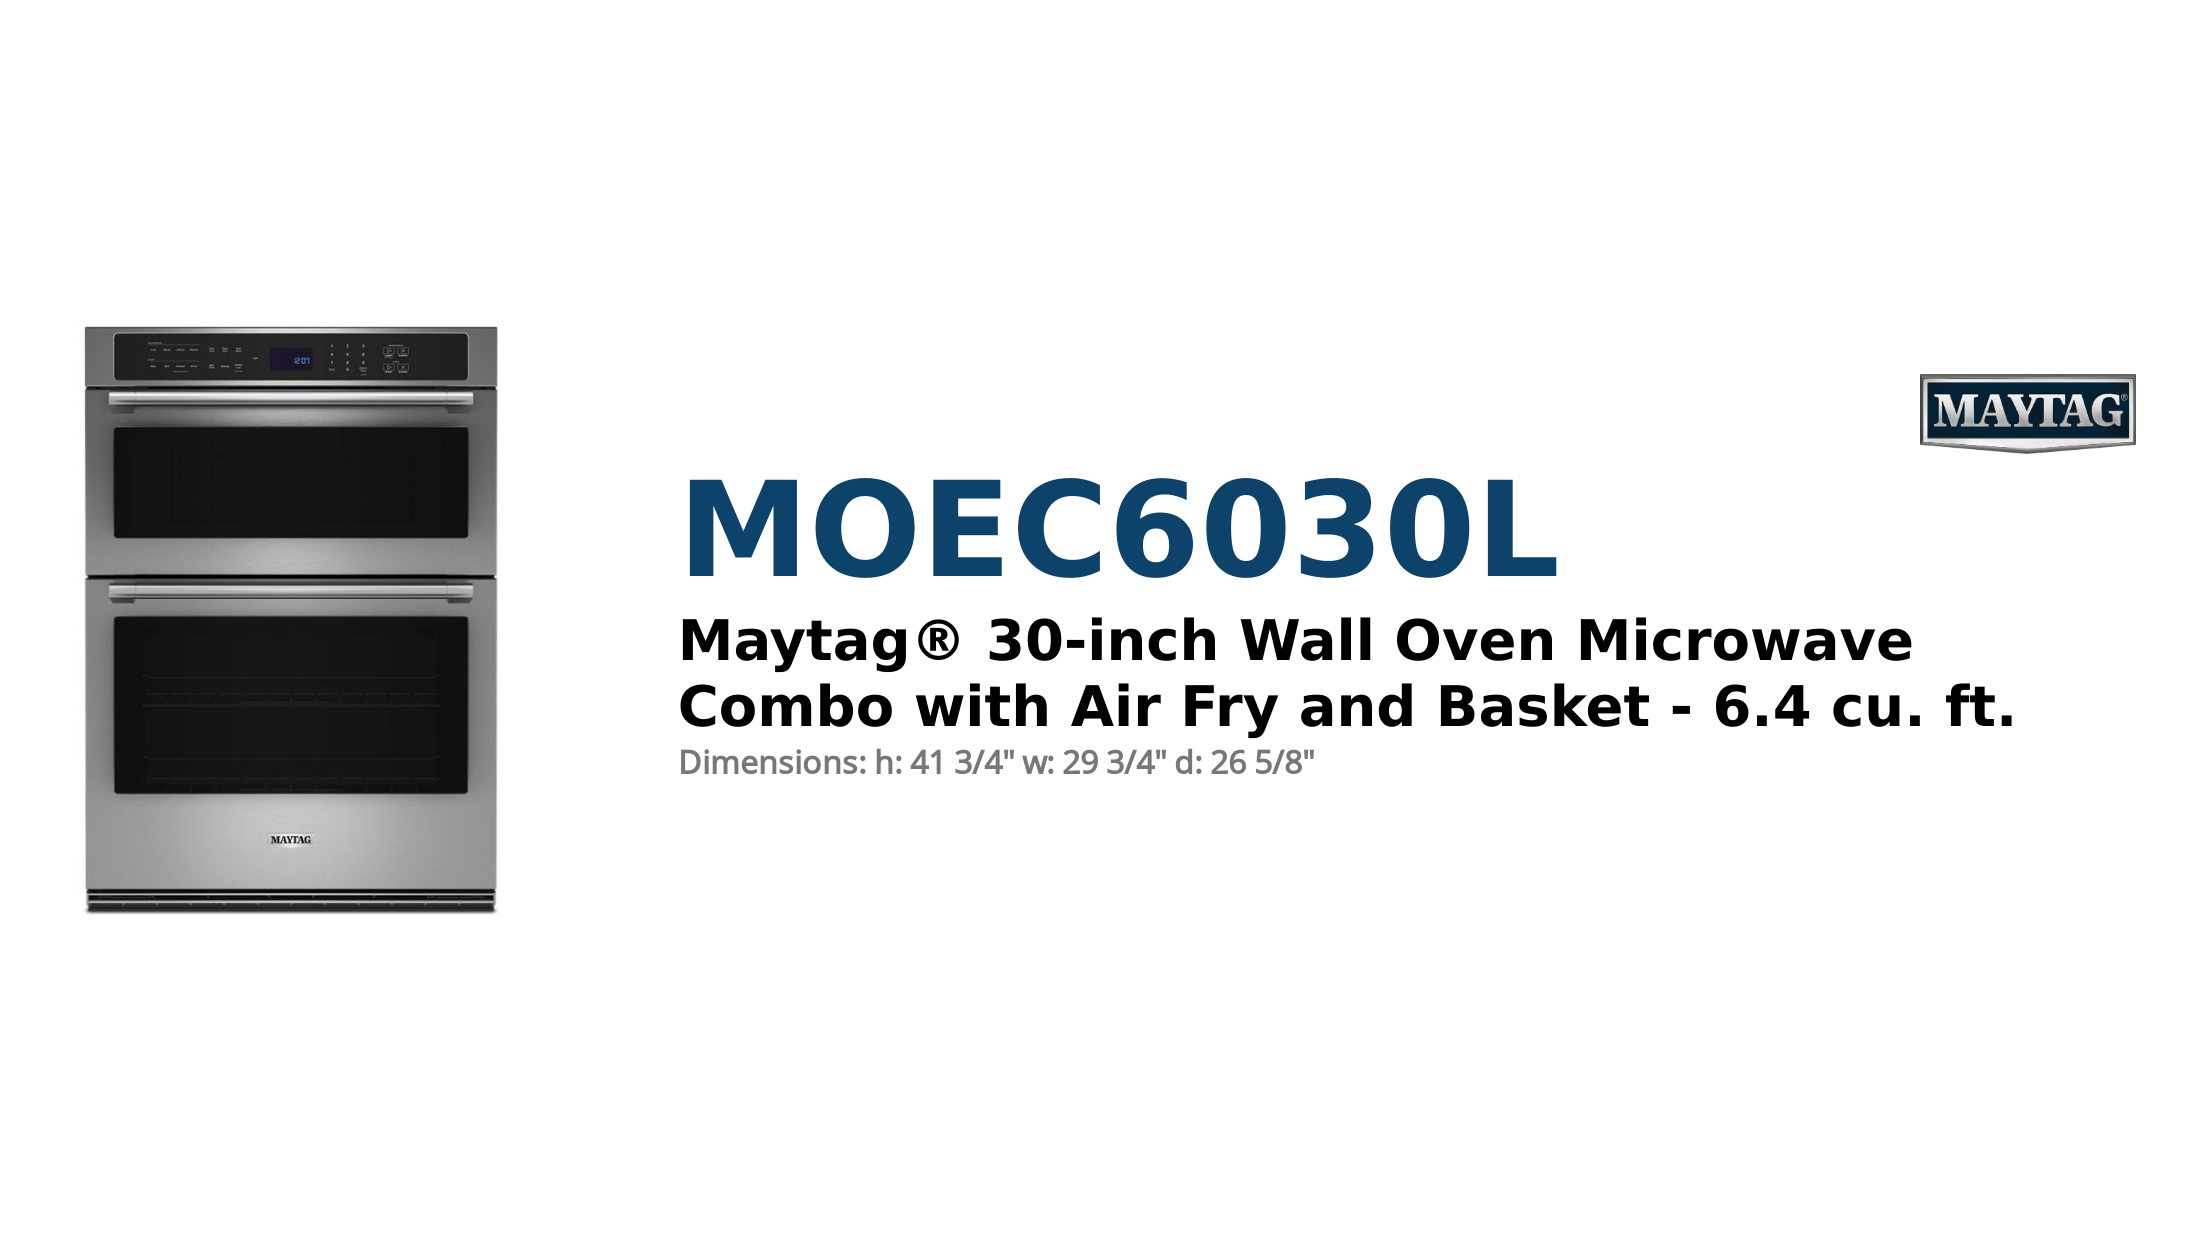 



MAYTAG® 30-INCH WALL OVEN MICROWAVE COMBO WITH AIR FRY AND BASKET - 6.4 CU. FT.



